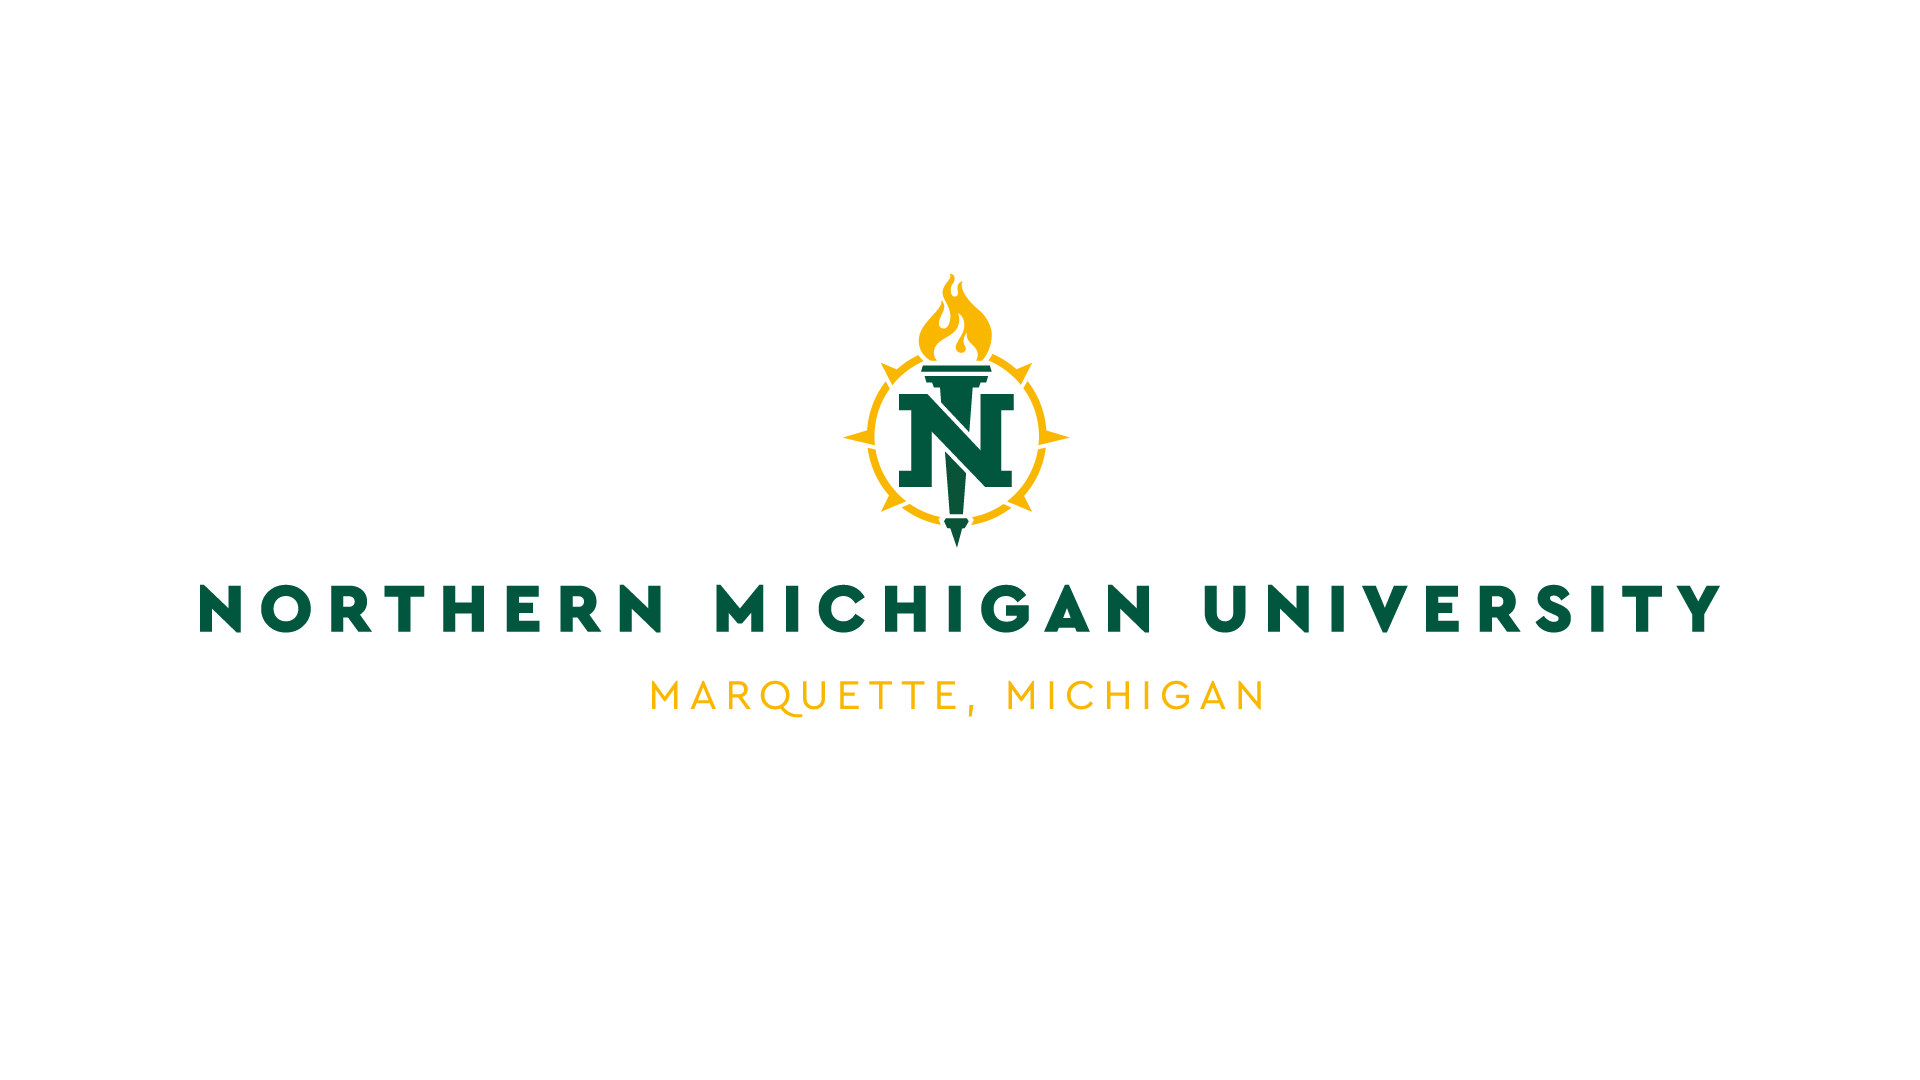 Old Marquette Logo - Logo Guidelines | University Marketing and Communications at NMU